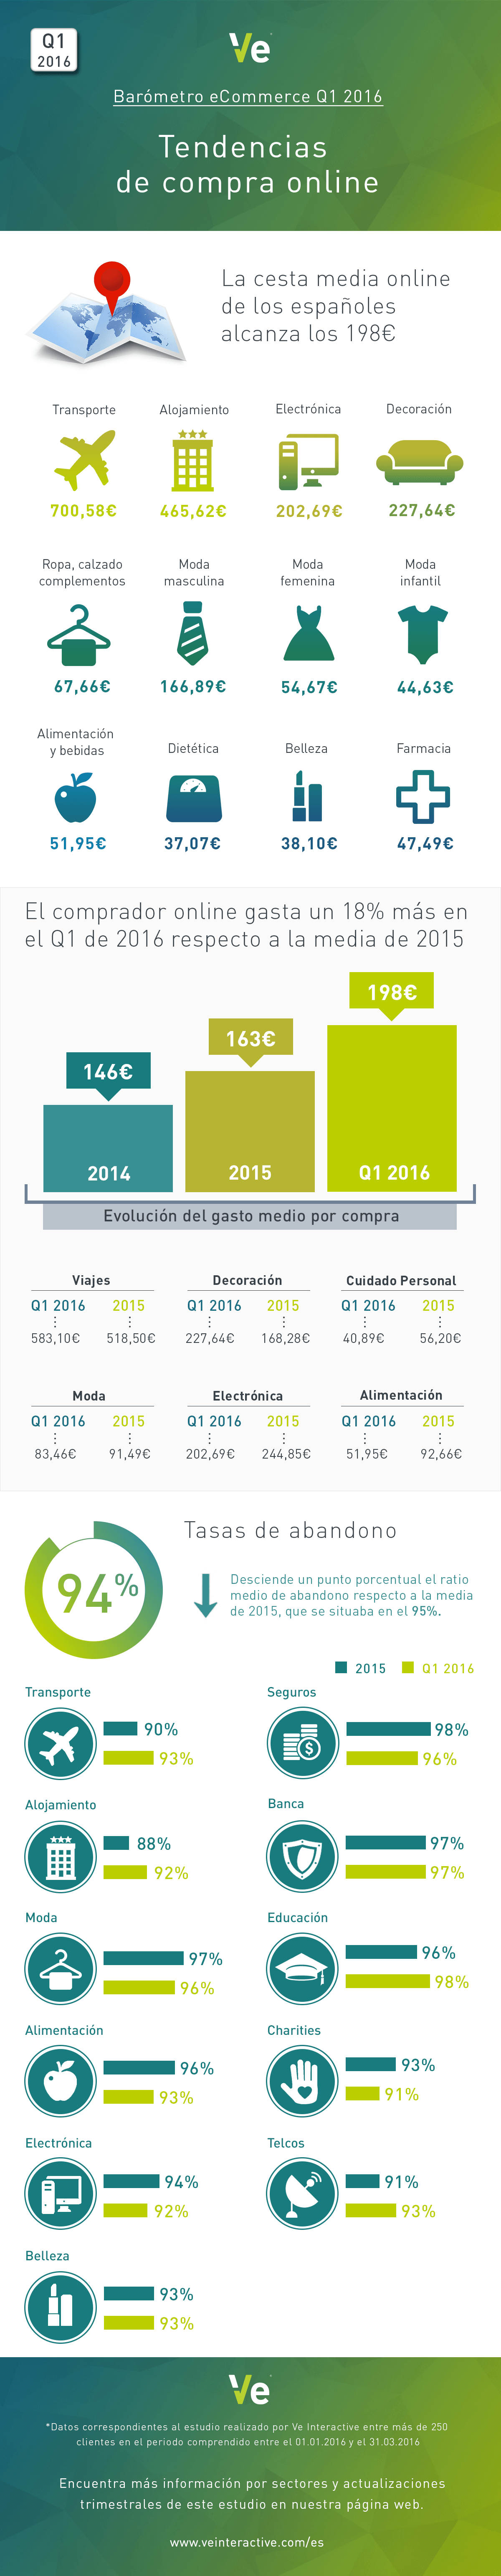 Info_Consumo-eCommerce-1T-2016.png